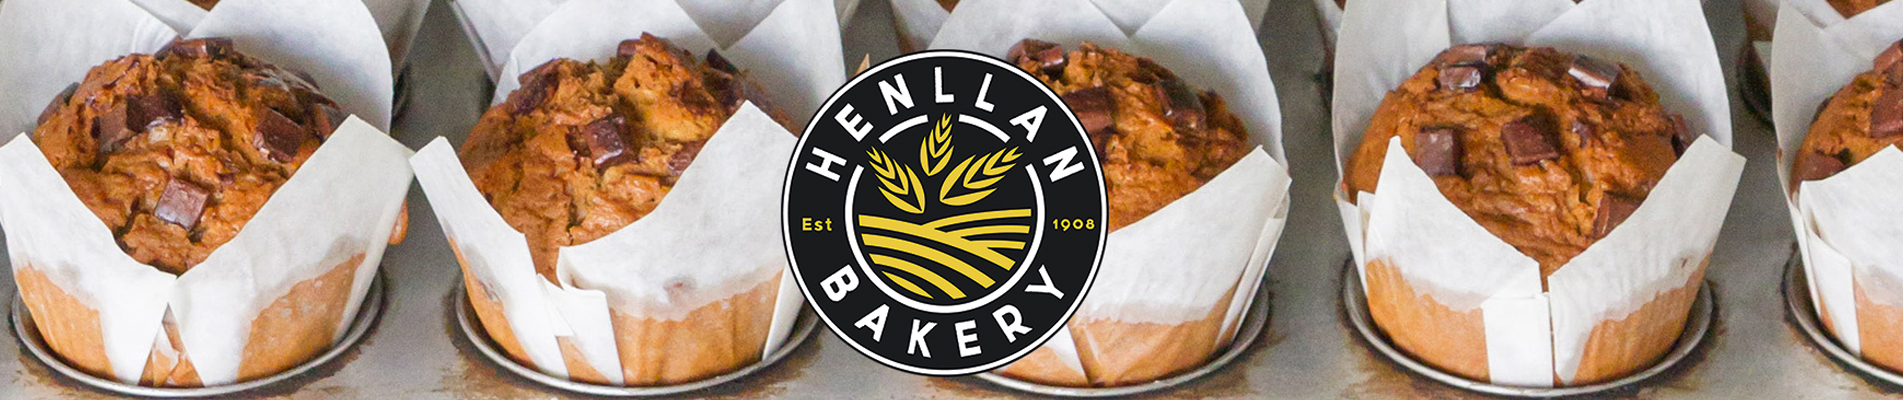 Henllan Bakery chooses Entyce for a brand-new packaging project